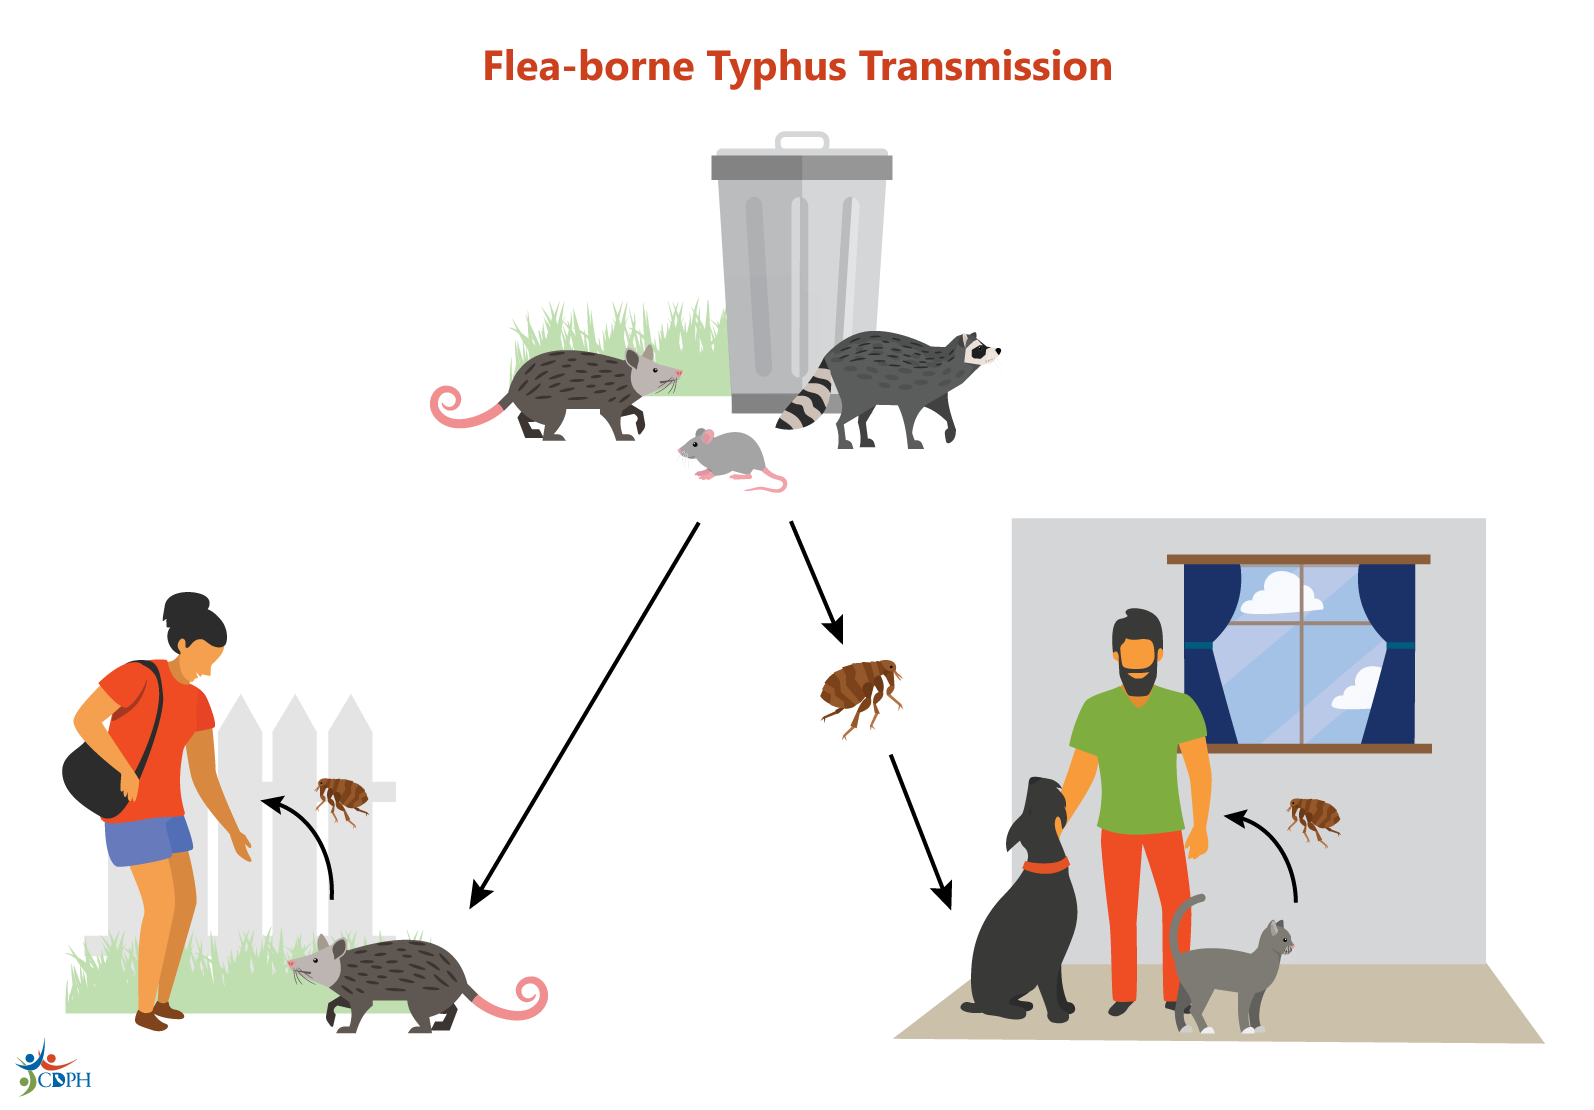 Flea-borne typhus transmission cycle showing fleas spreading bacteria from rodents to people